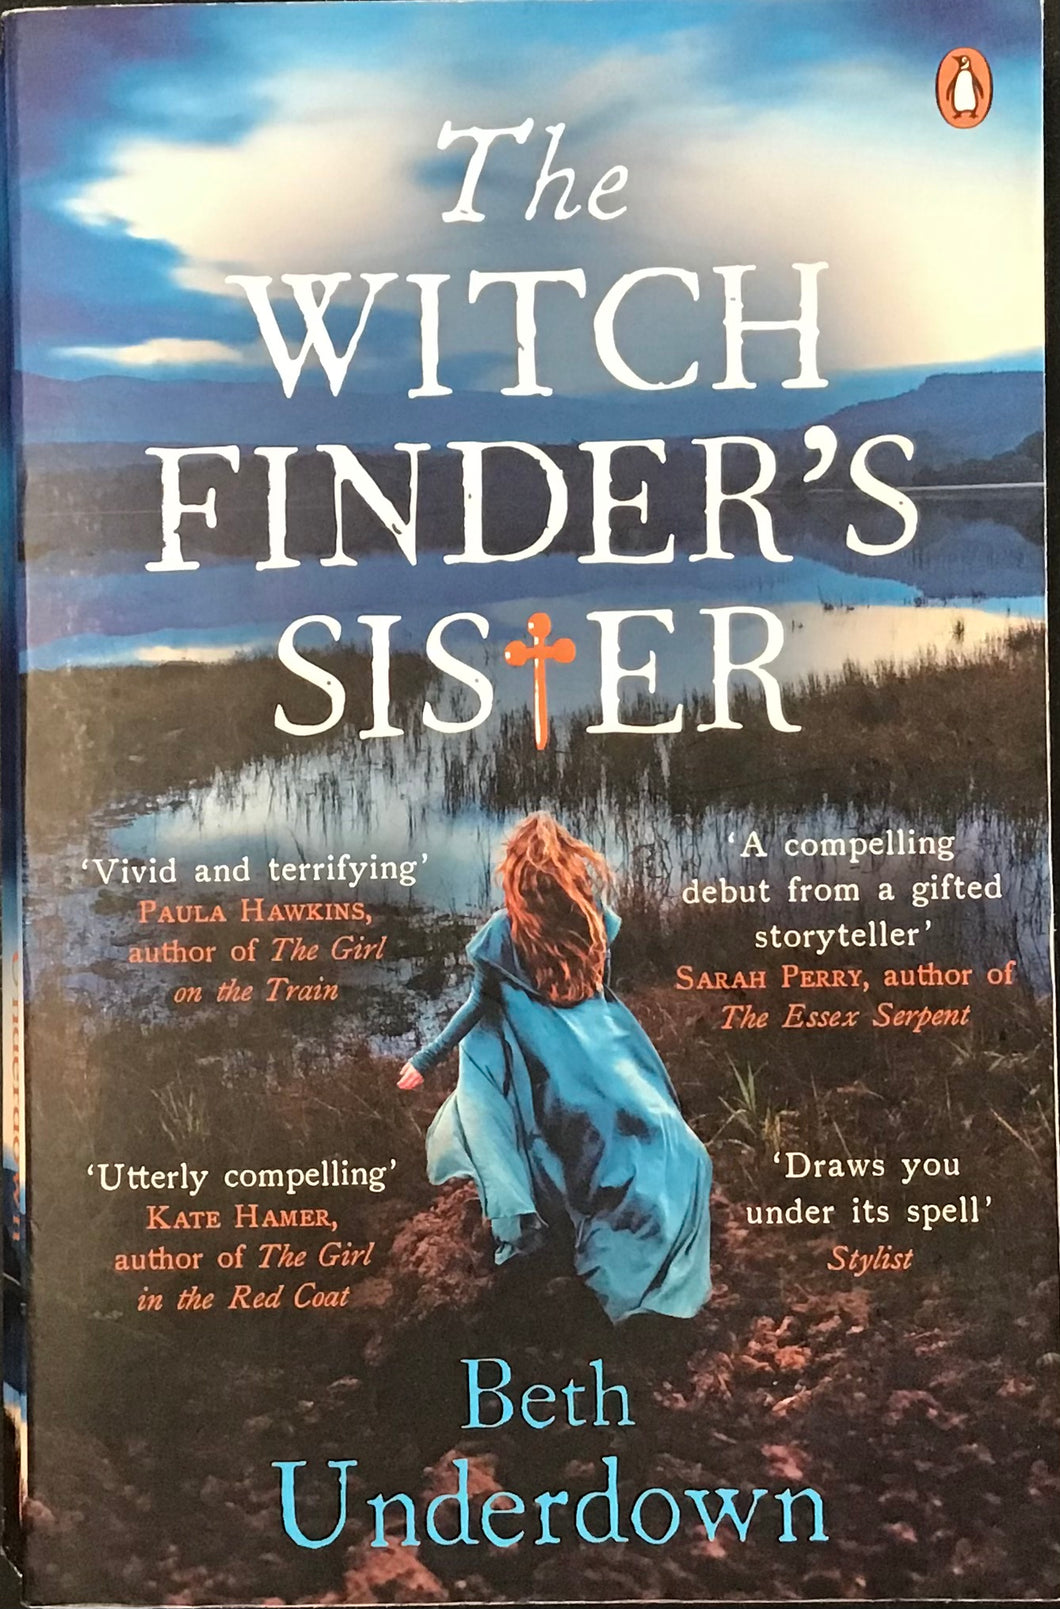 The Witch Finder's Sister by Beth Underdown